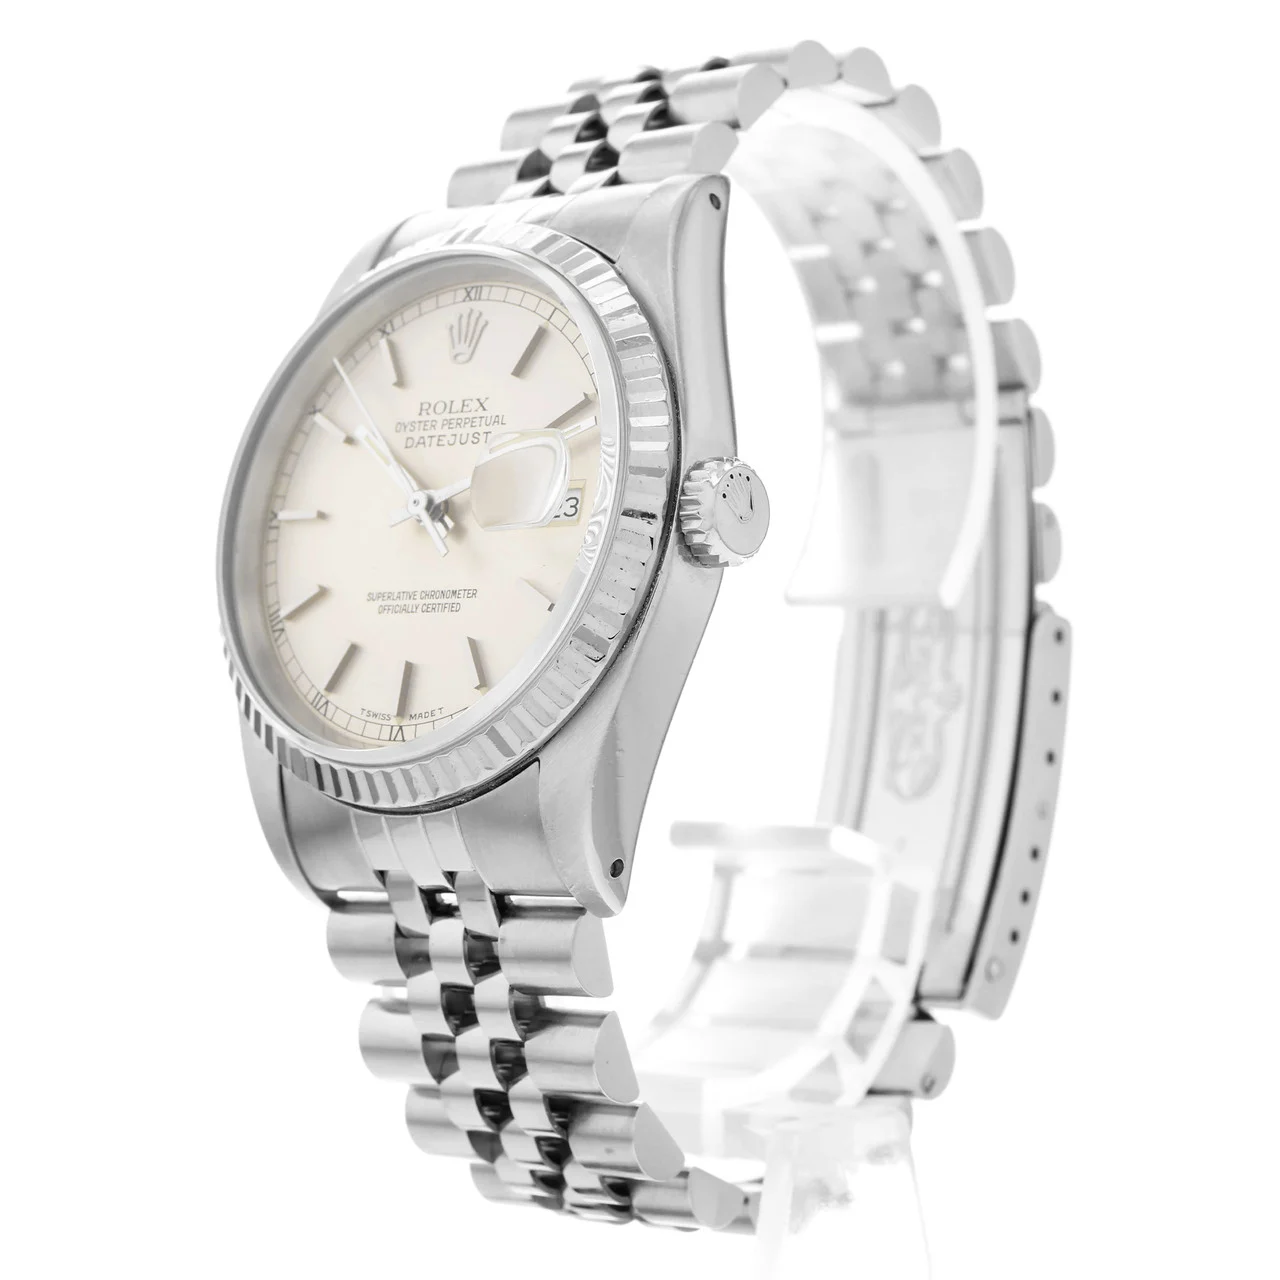 1989 Rolex Datejust 36 Fluted / Silver / Jubilee 16234 Listing Image 2